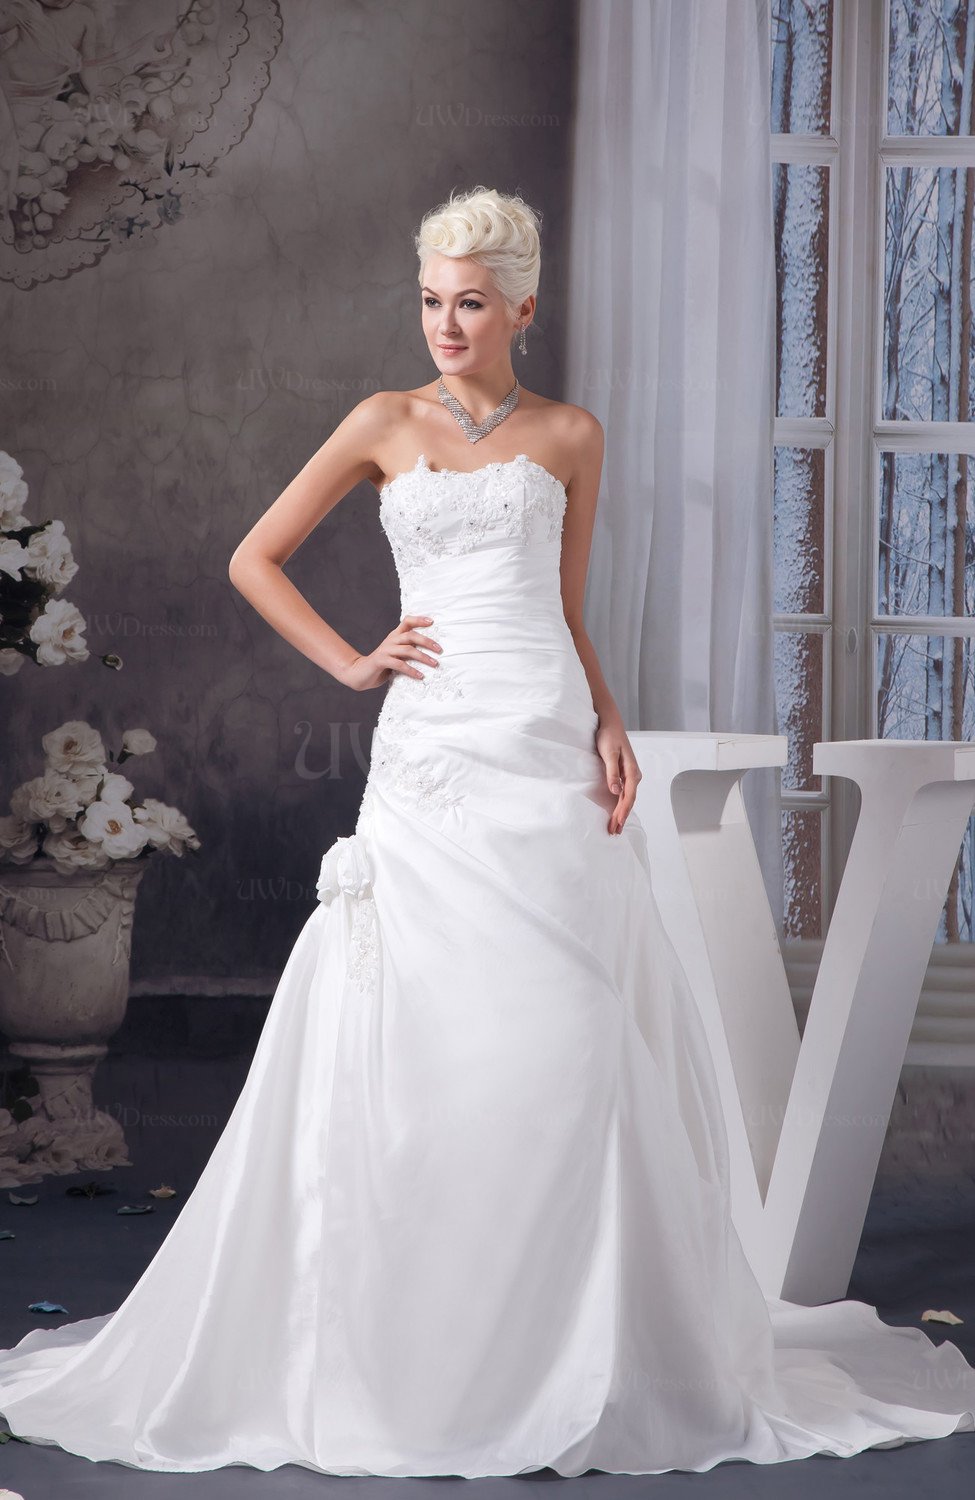 White Allure Bridal Gowns Inexpensive Backless Elegant